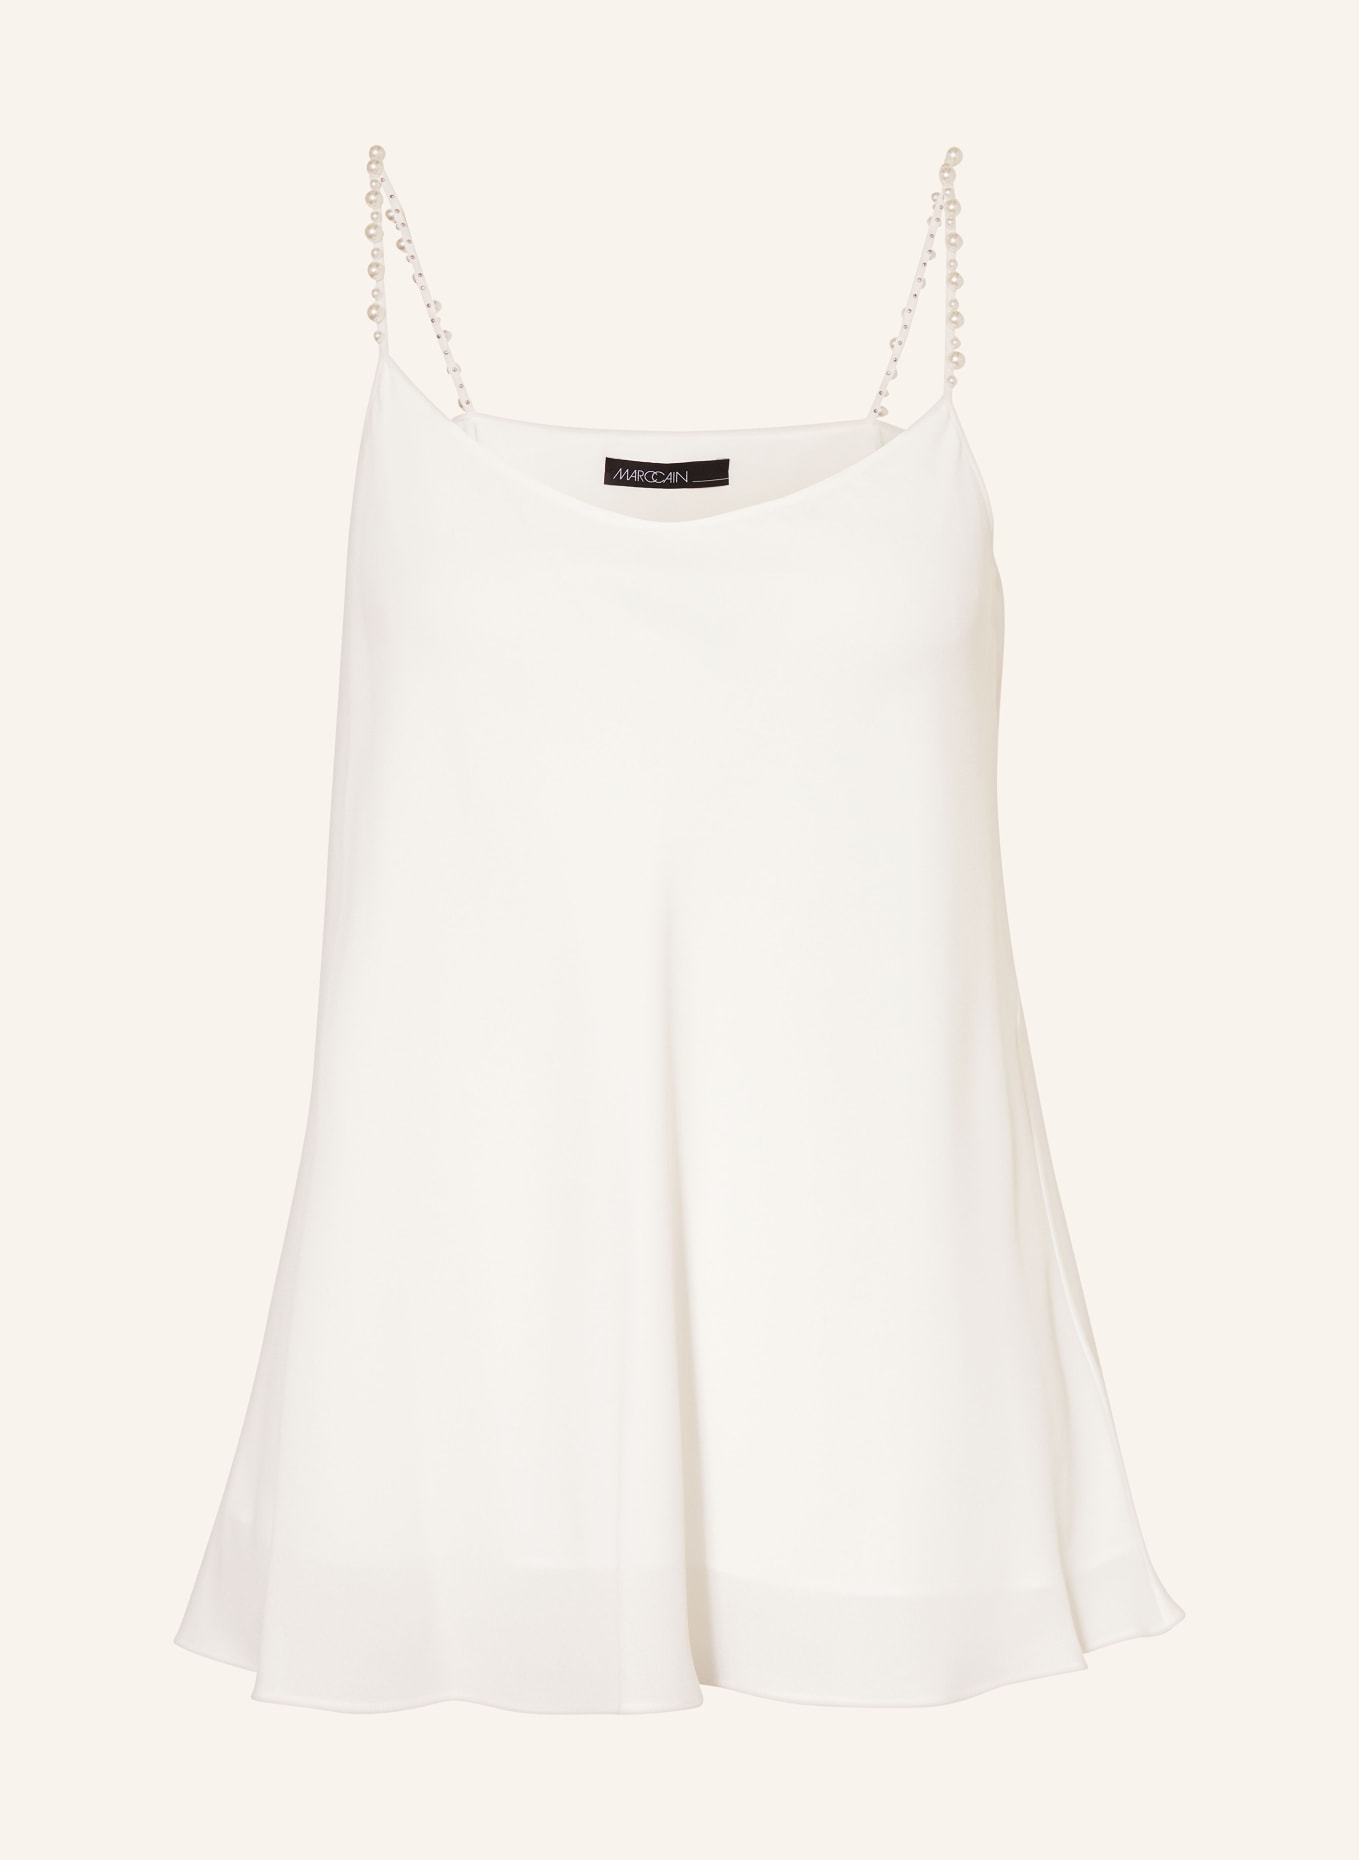 MARC CAIN Blouse top with decorative beads, Color: WHITE (Image 1)